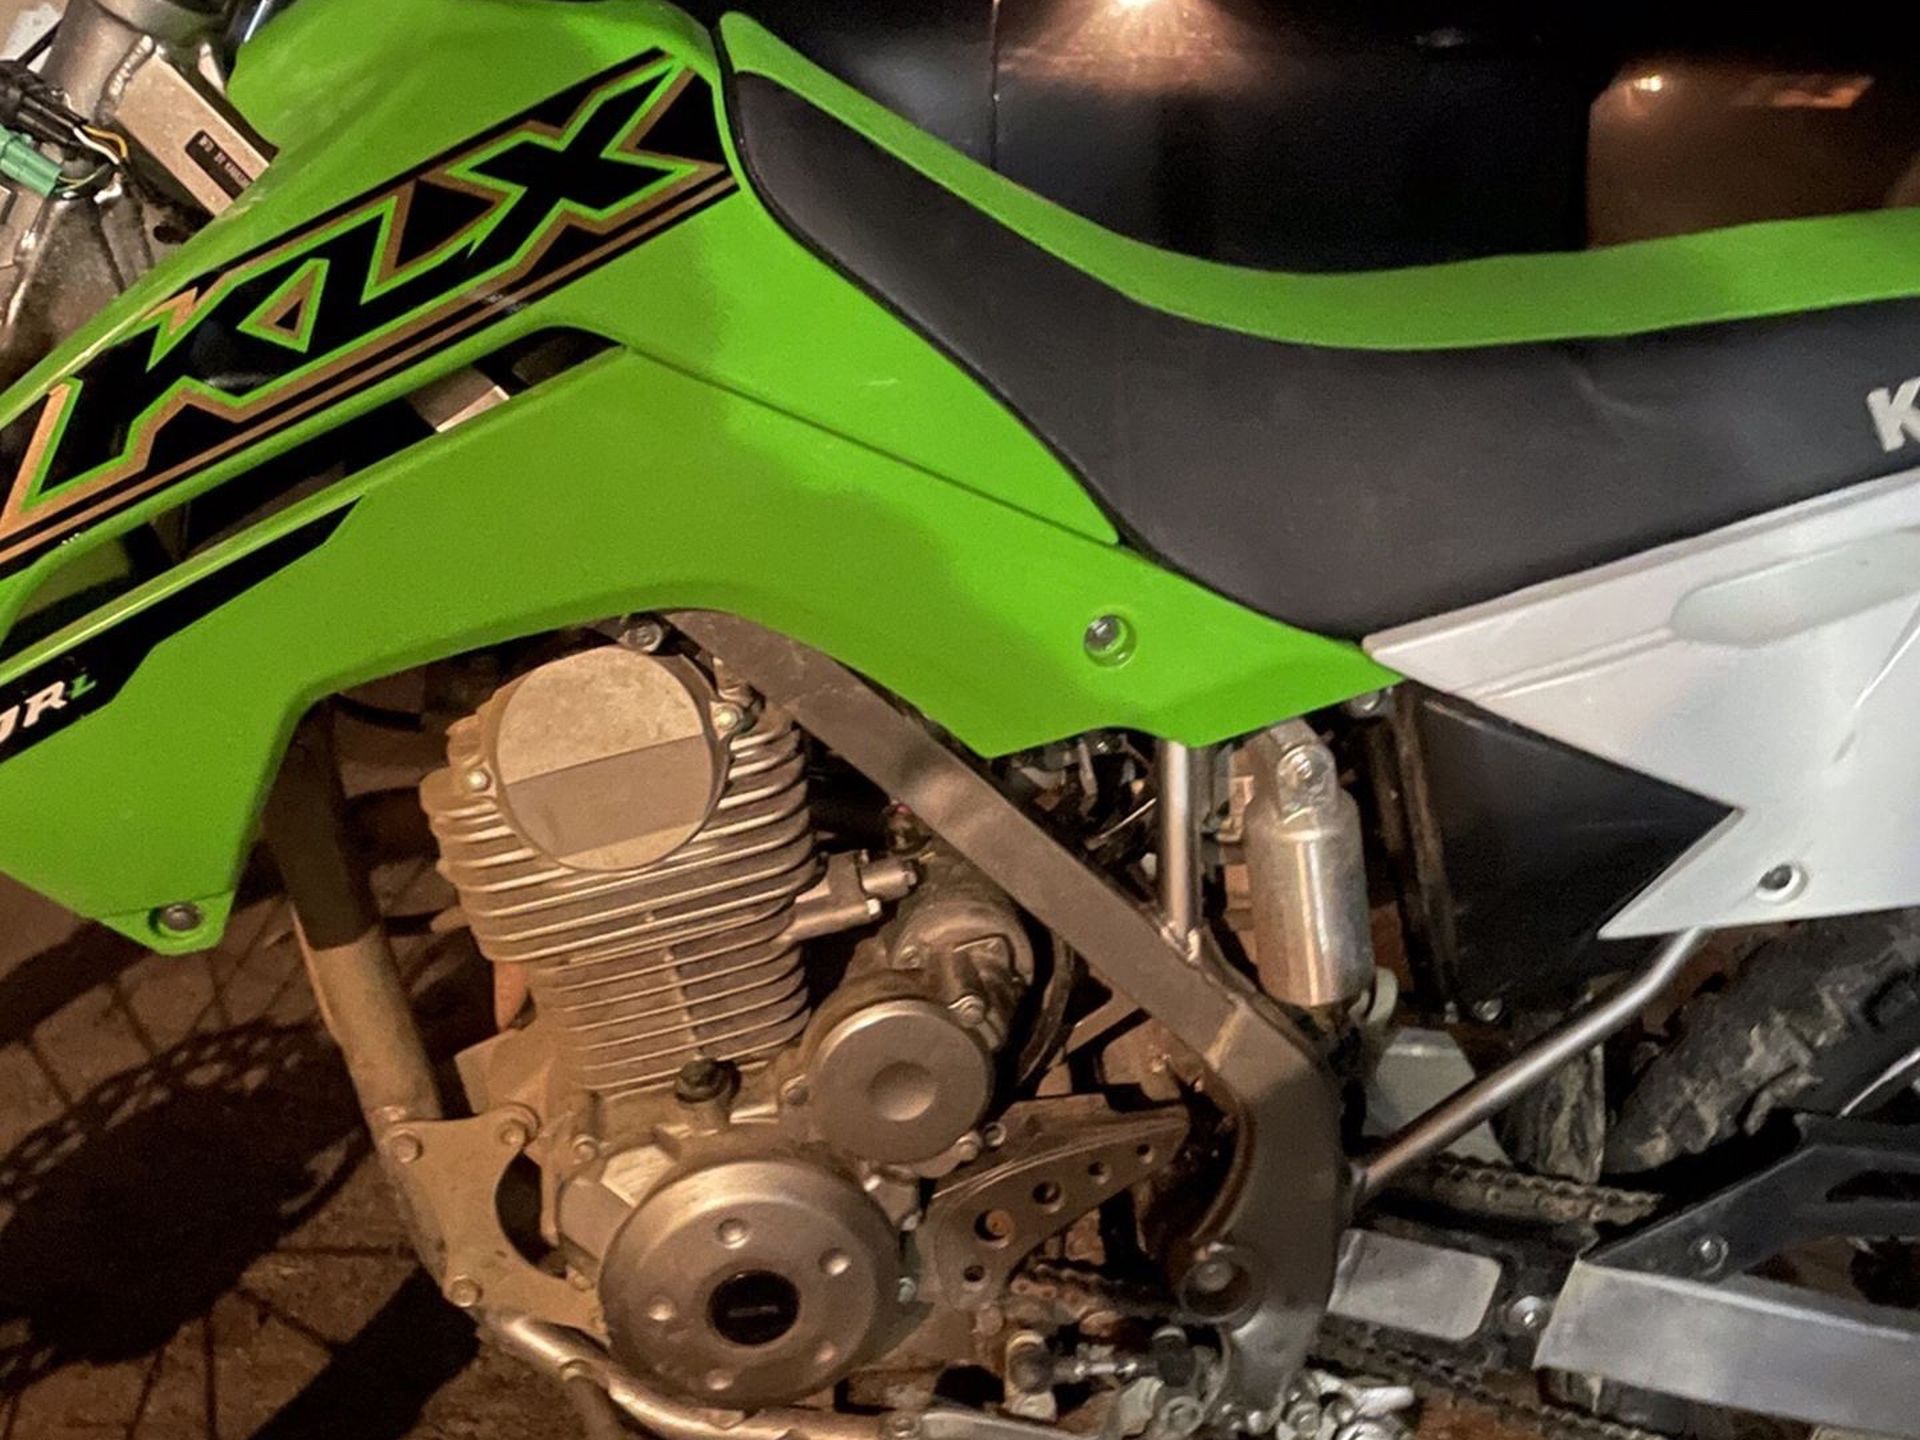 2021 Kawasaki 140R With all the paper work